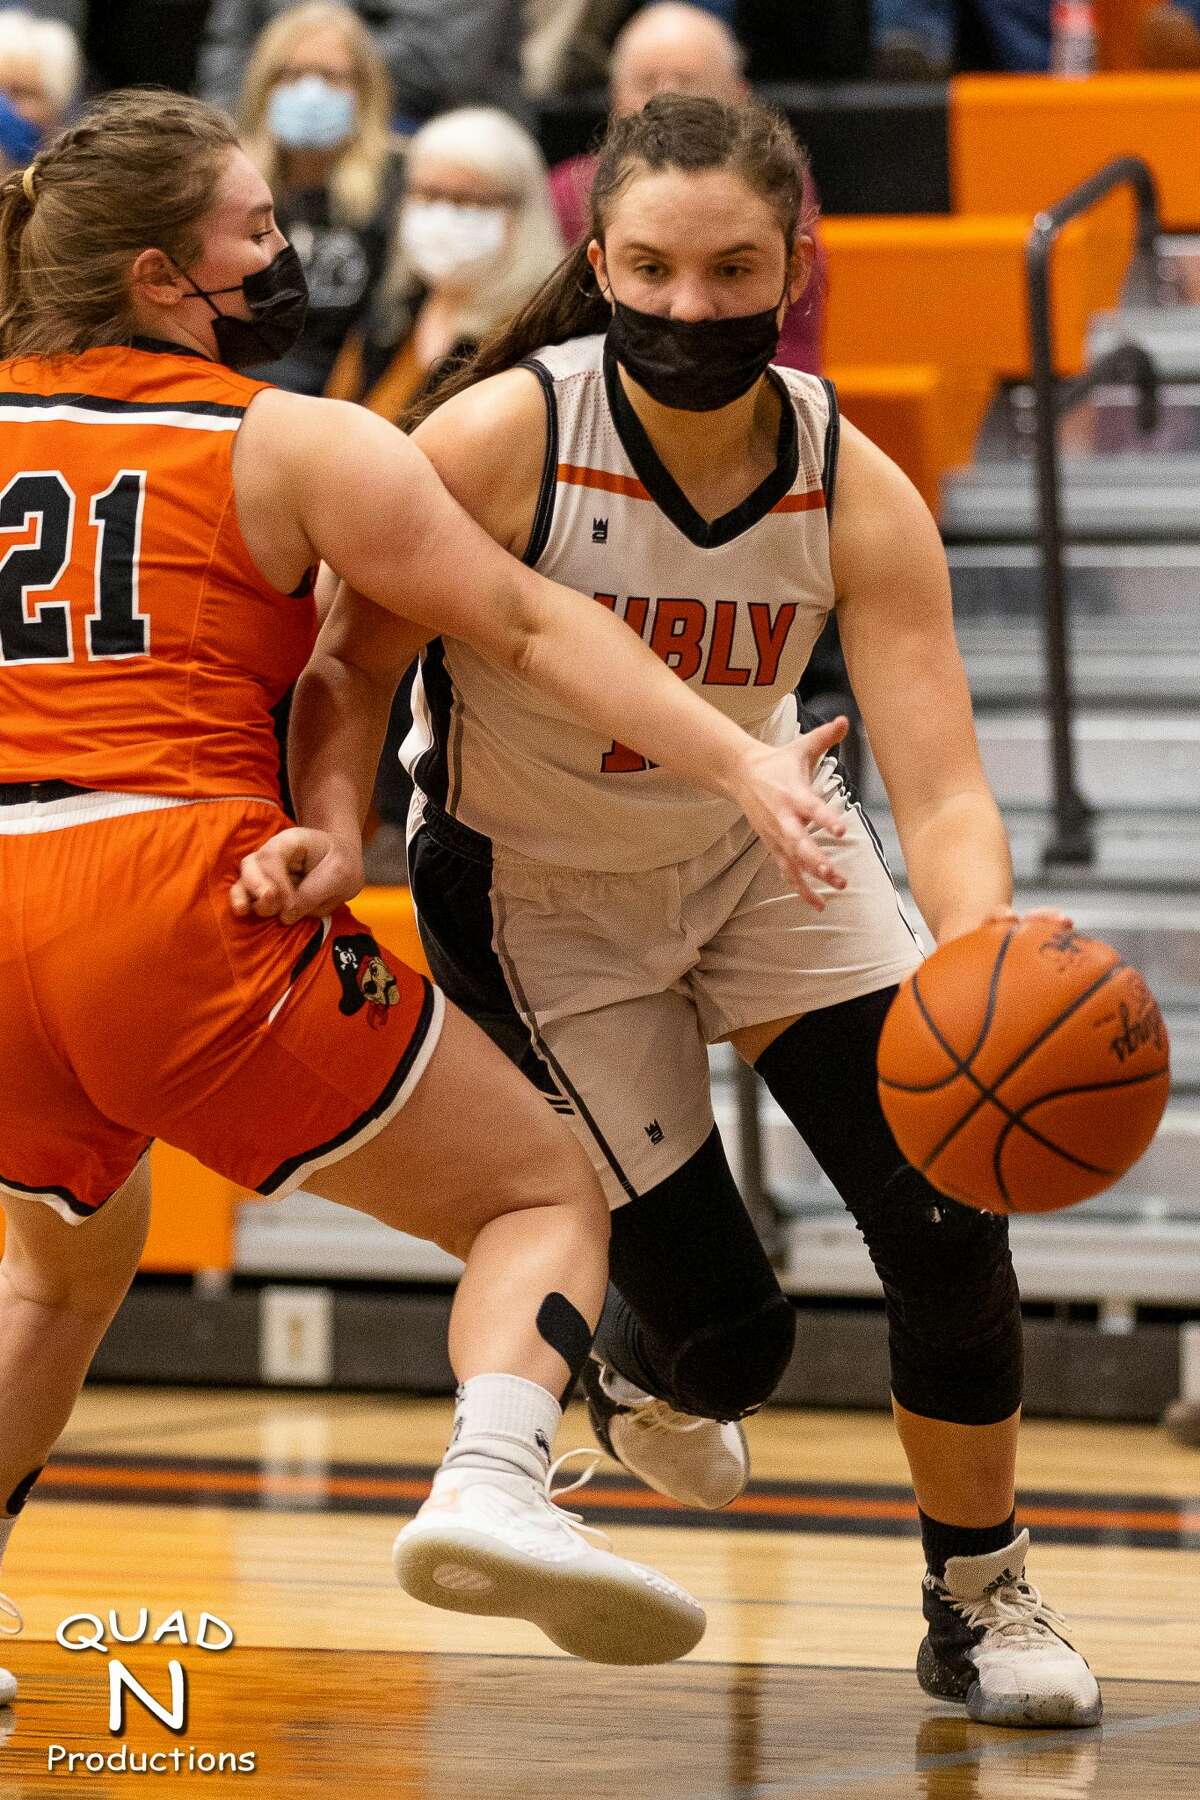 The Ubly girls basketball team outlasted rival Harbor Beach in a nail-biting, double-overtime thriller on Thursday night. The Bearcats won, 51-45, to lay claim to a share of the Greater Thumb Conference East title.